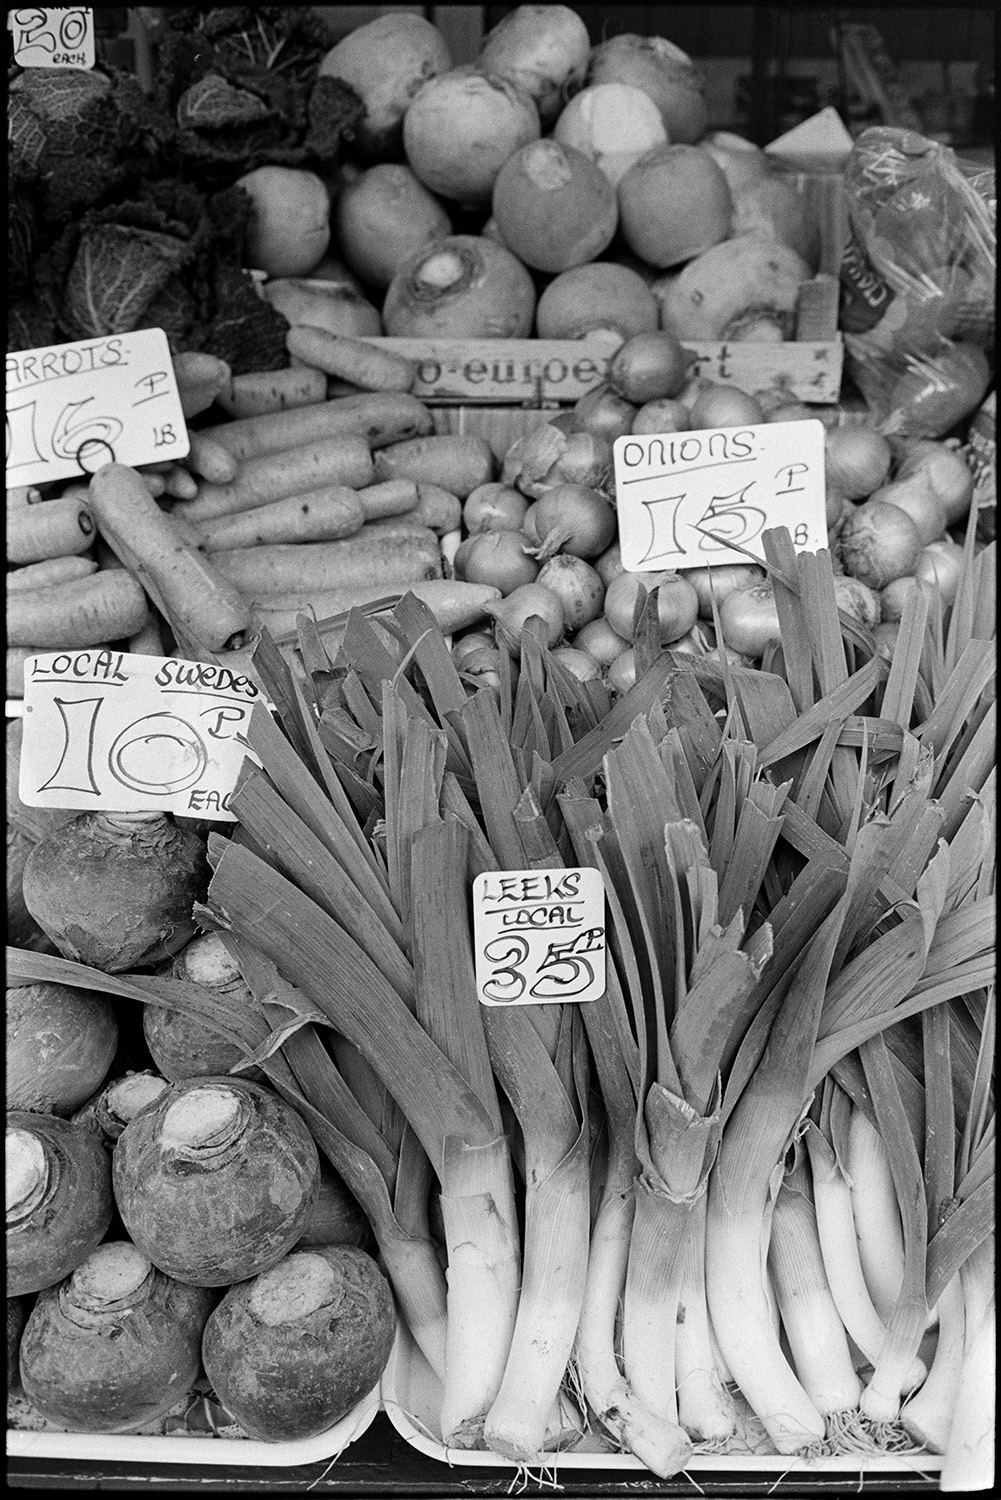 Pannier market, vegetables in baskets, potatoes, swedes, leeks.
[Swedes, leeks, onions, carrots, cabbages, potatoes and turnips with price labels on display on a vegetable stall at Barnstaple Pannier Market.]